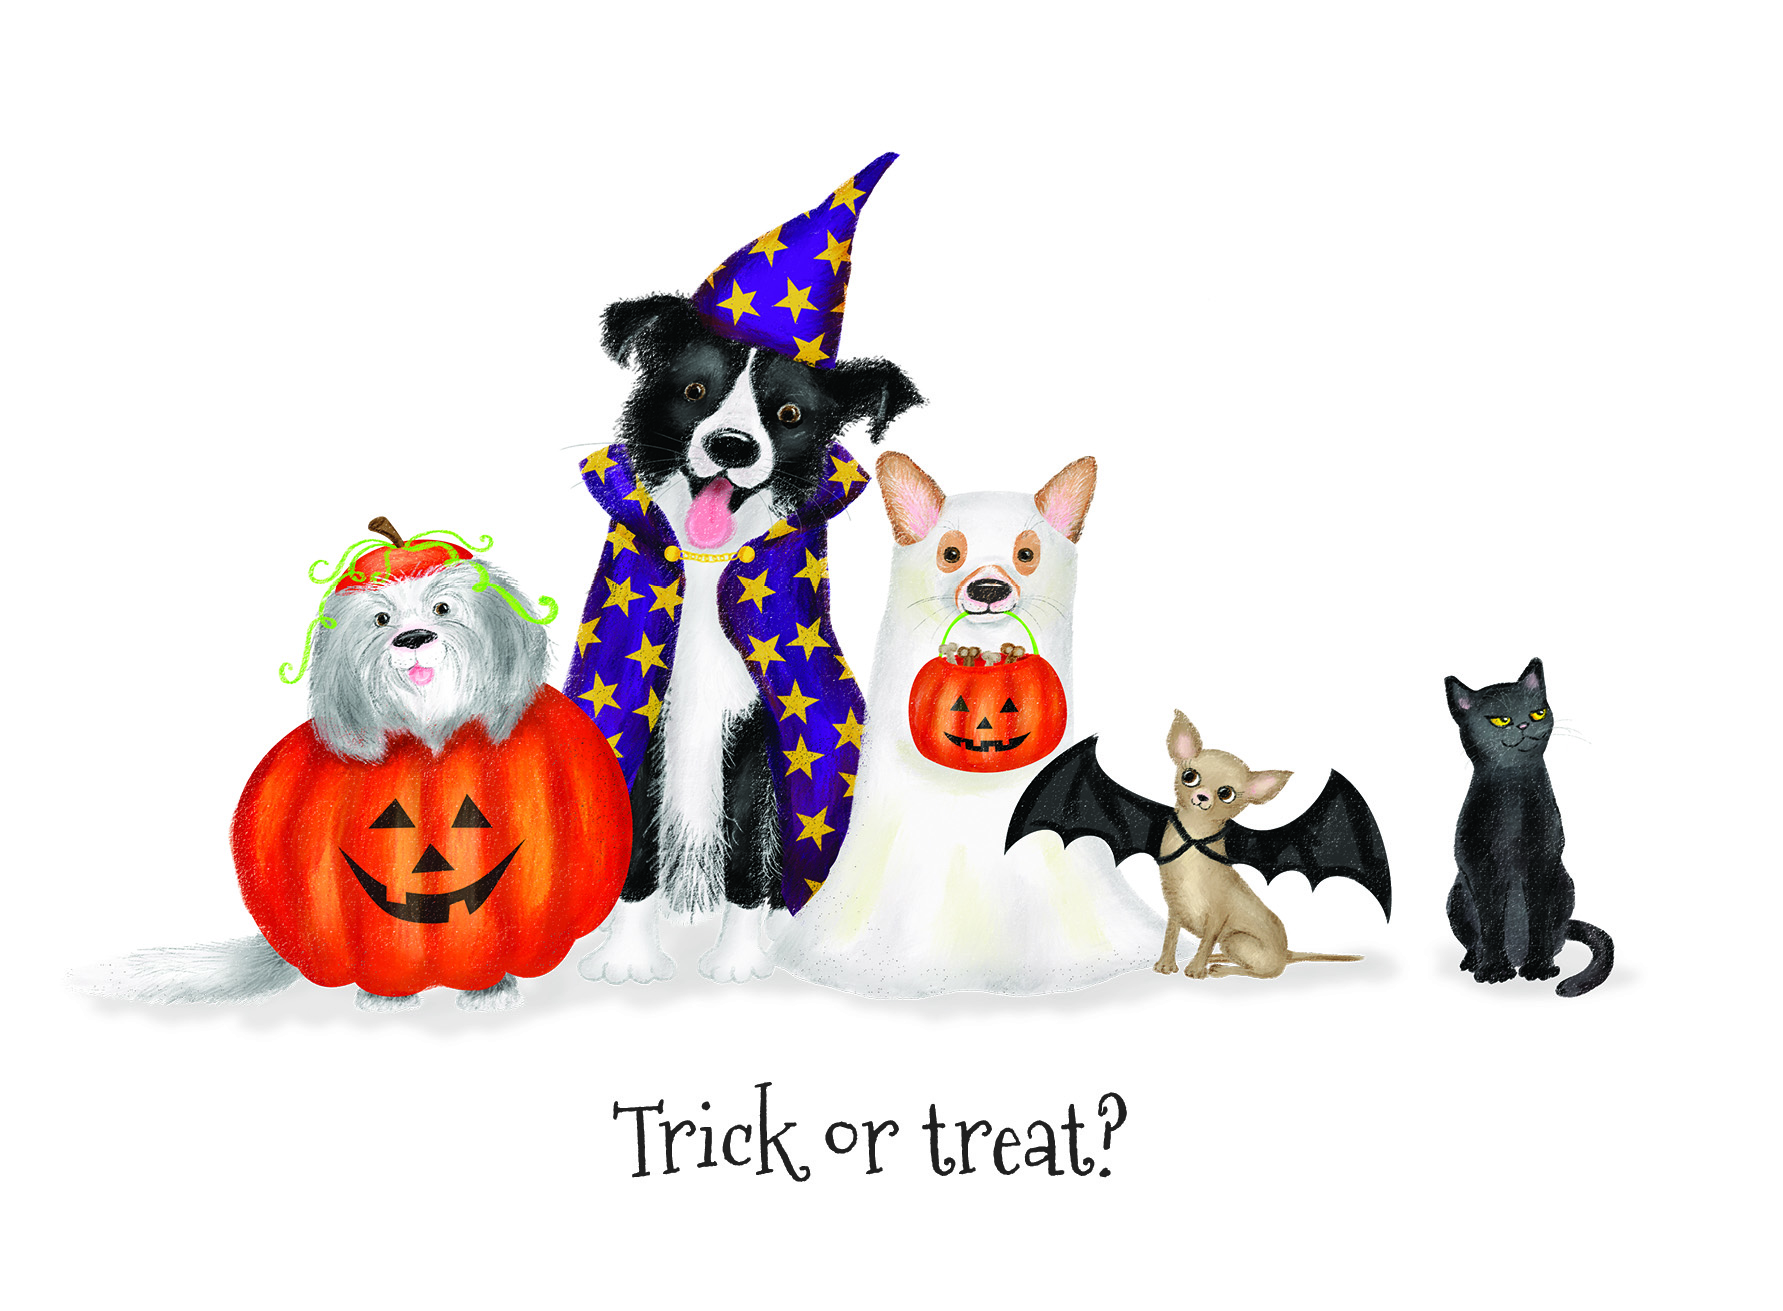 Dogs dressed up in Halloween costumes, with Trick or treat? written underneath